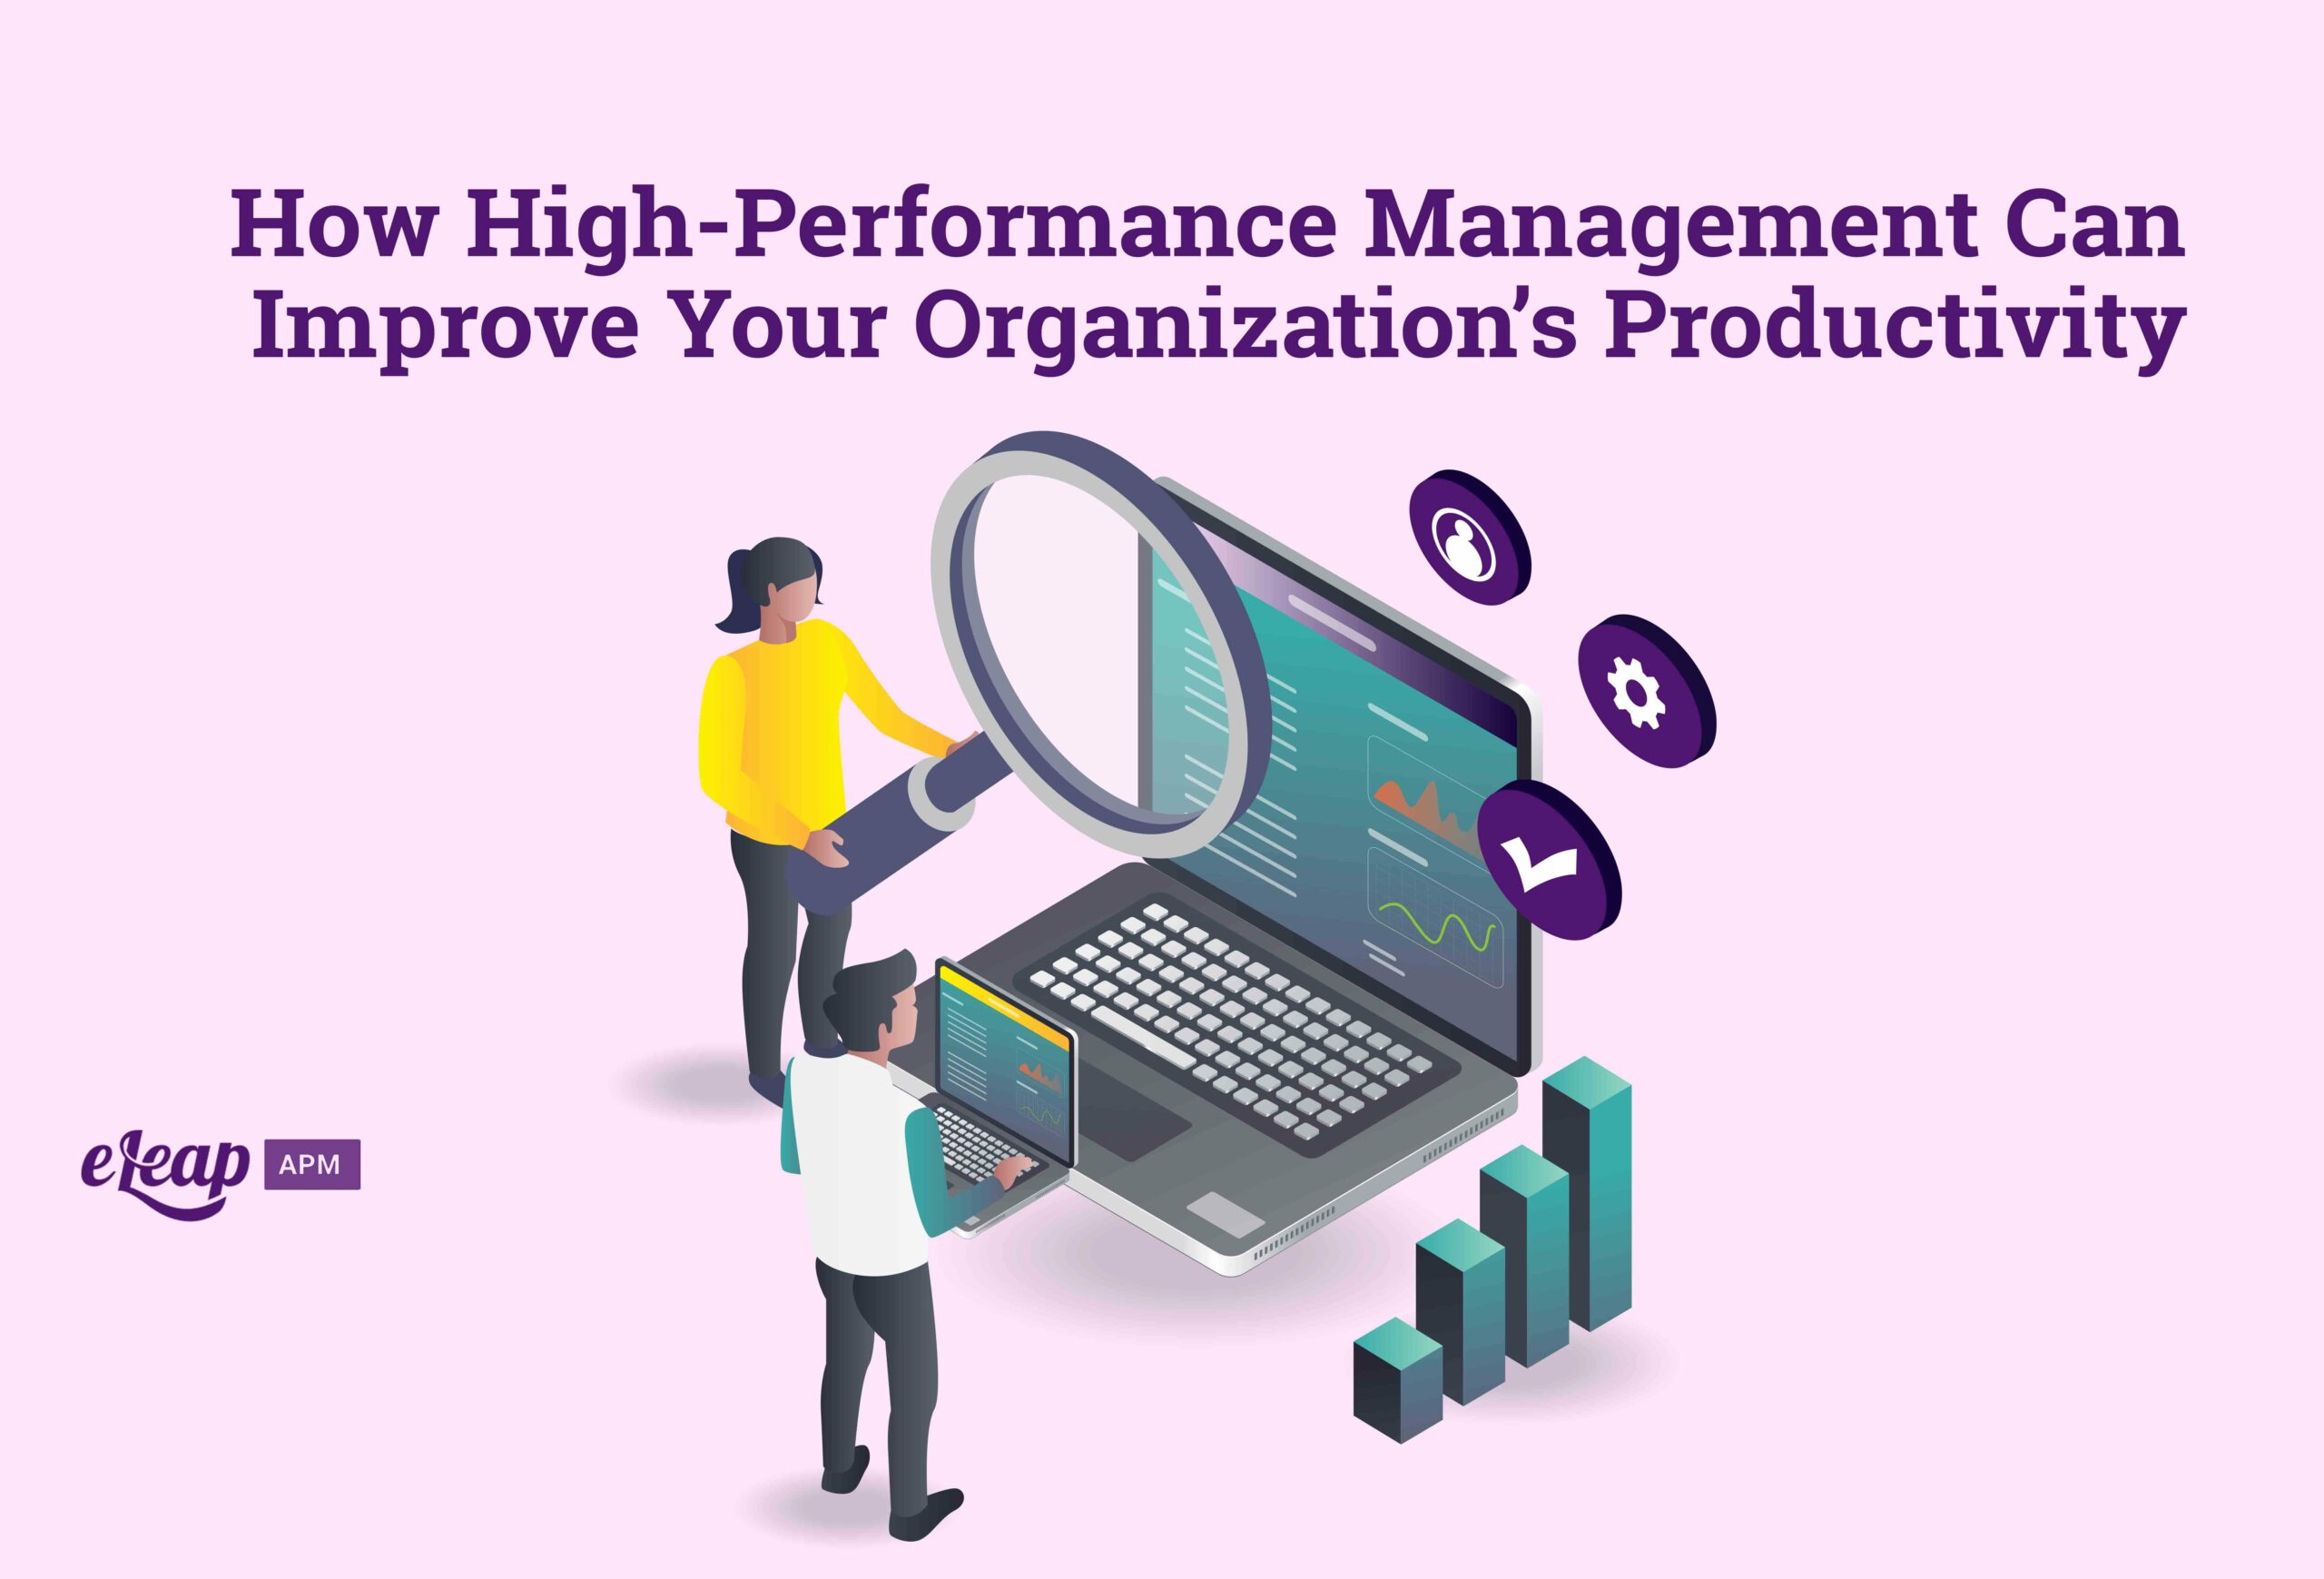 How High-Performance Management Can Improve Your Organization’s Productivity